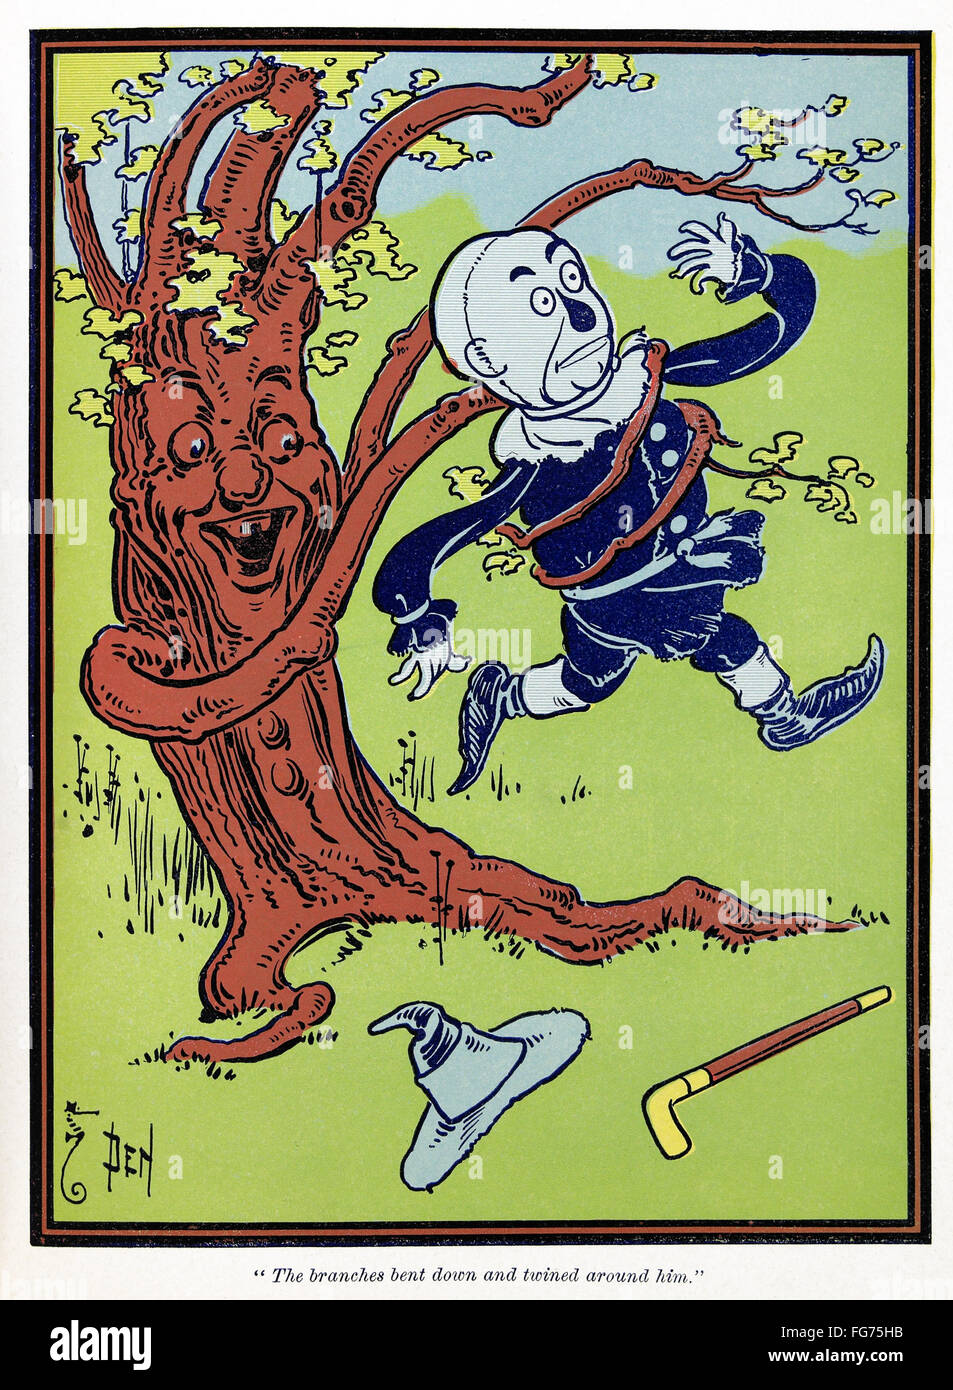 WIZARD OF OZ, 1900. /n'The branches bent down and twined around him.' Illustration by W.W. Denslow for the first edition of 'The Wonderful Wizard of Oz' by L. Frank Baum, 1900. Stock Photo